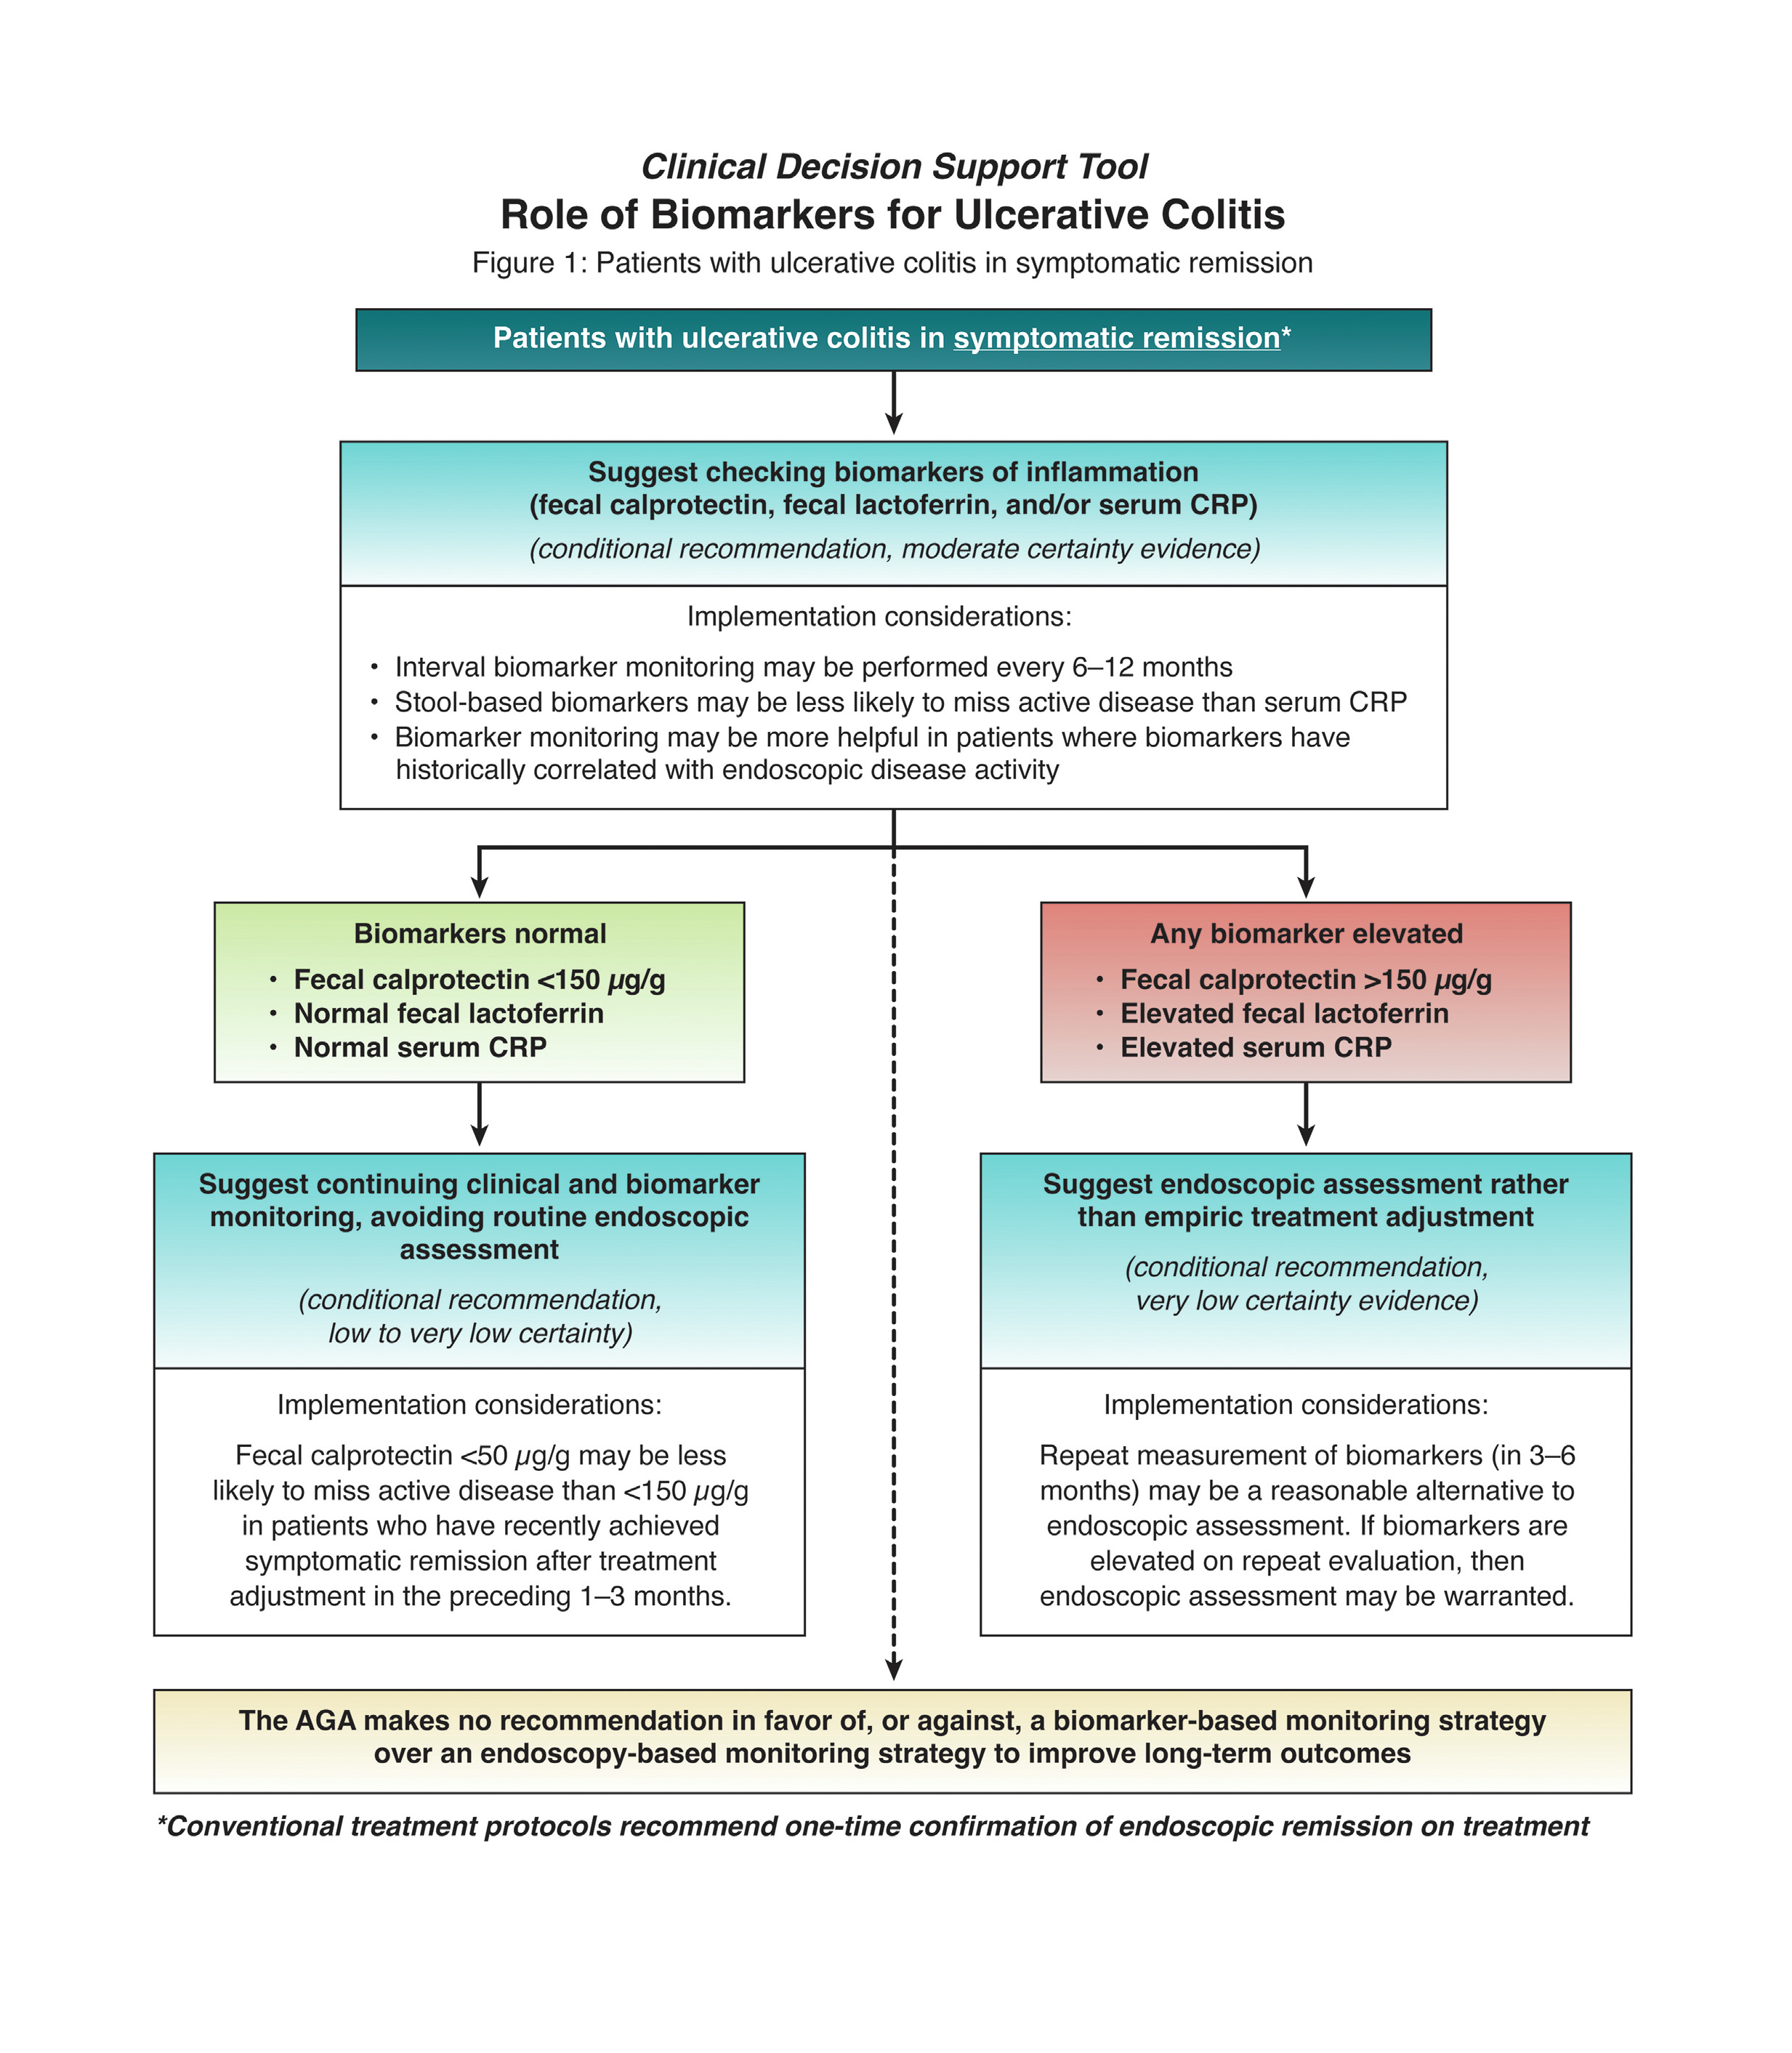 AGA guideline on biomarkers for ulcerative colitis: clinical decision support tool